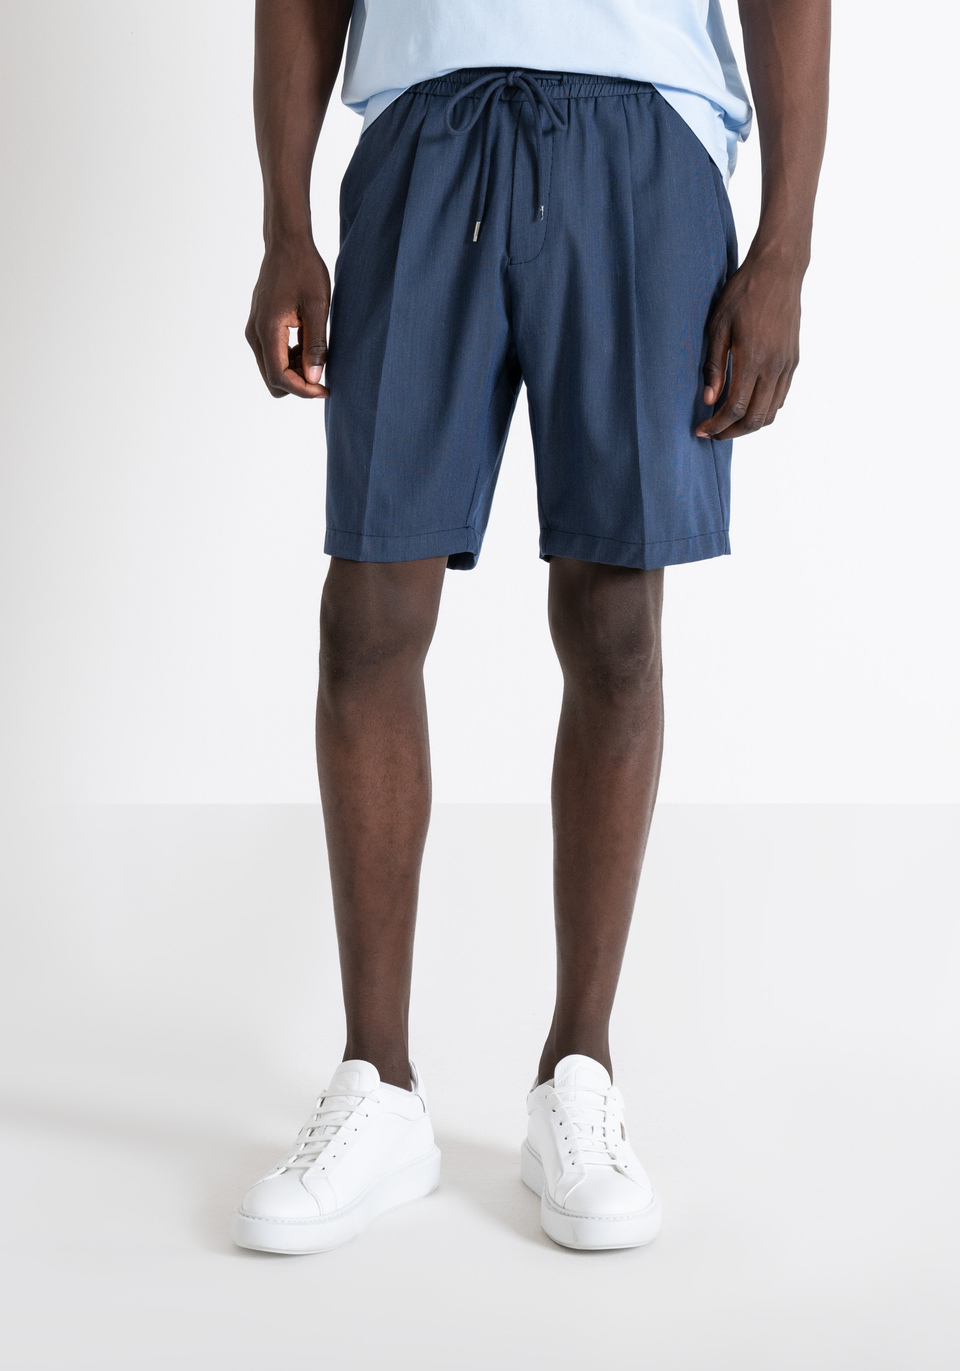 REGULAR FIT "NEIL" SHORTS WITH ELASTIC WAISTBAND AND DRAWSTRING - Antony Morato Online Shop